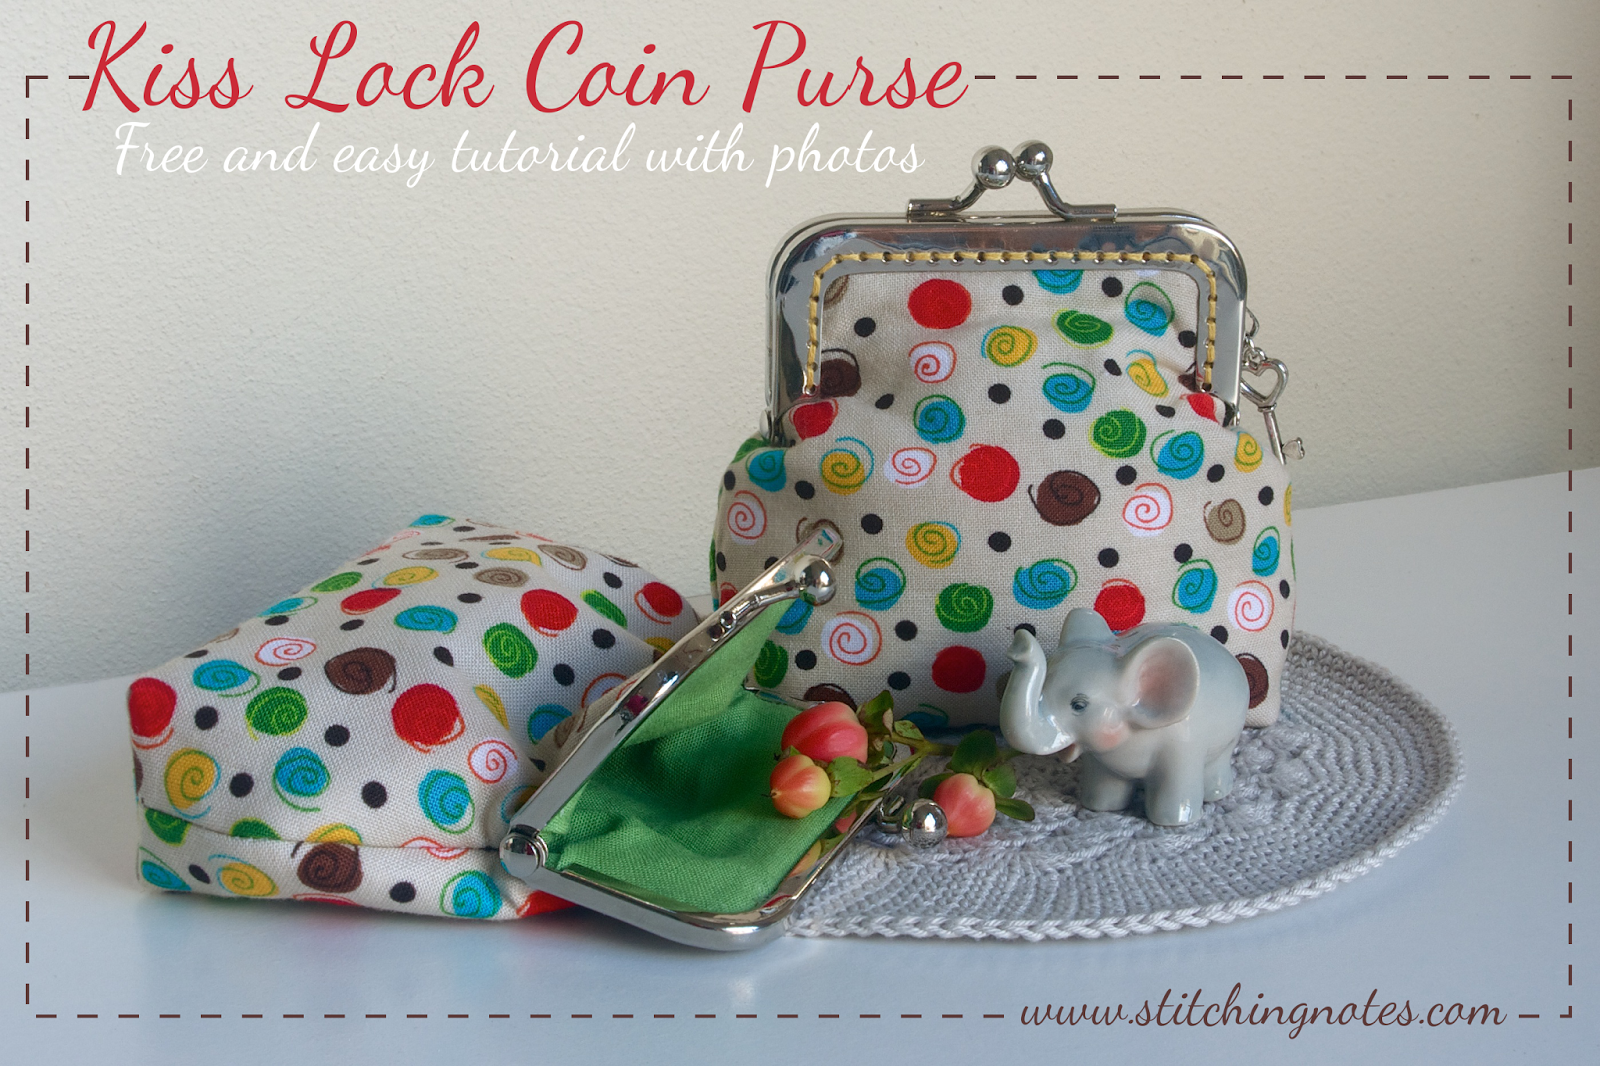 10.5X5.5 cm/ 4X2 inch  PDF kiss lock pattern and Tutorial for making your own kiss lock bag